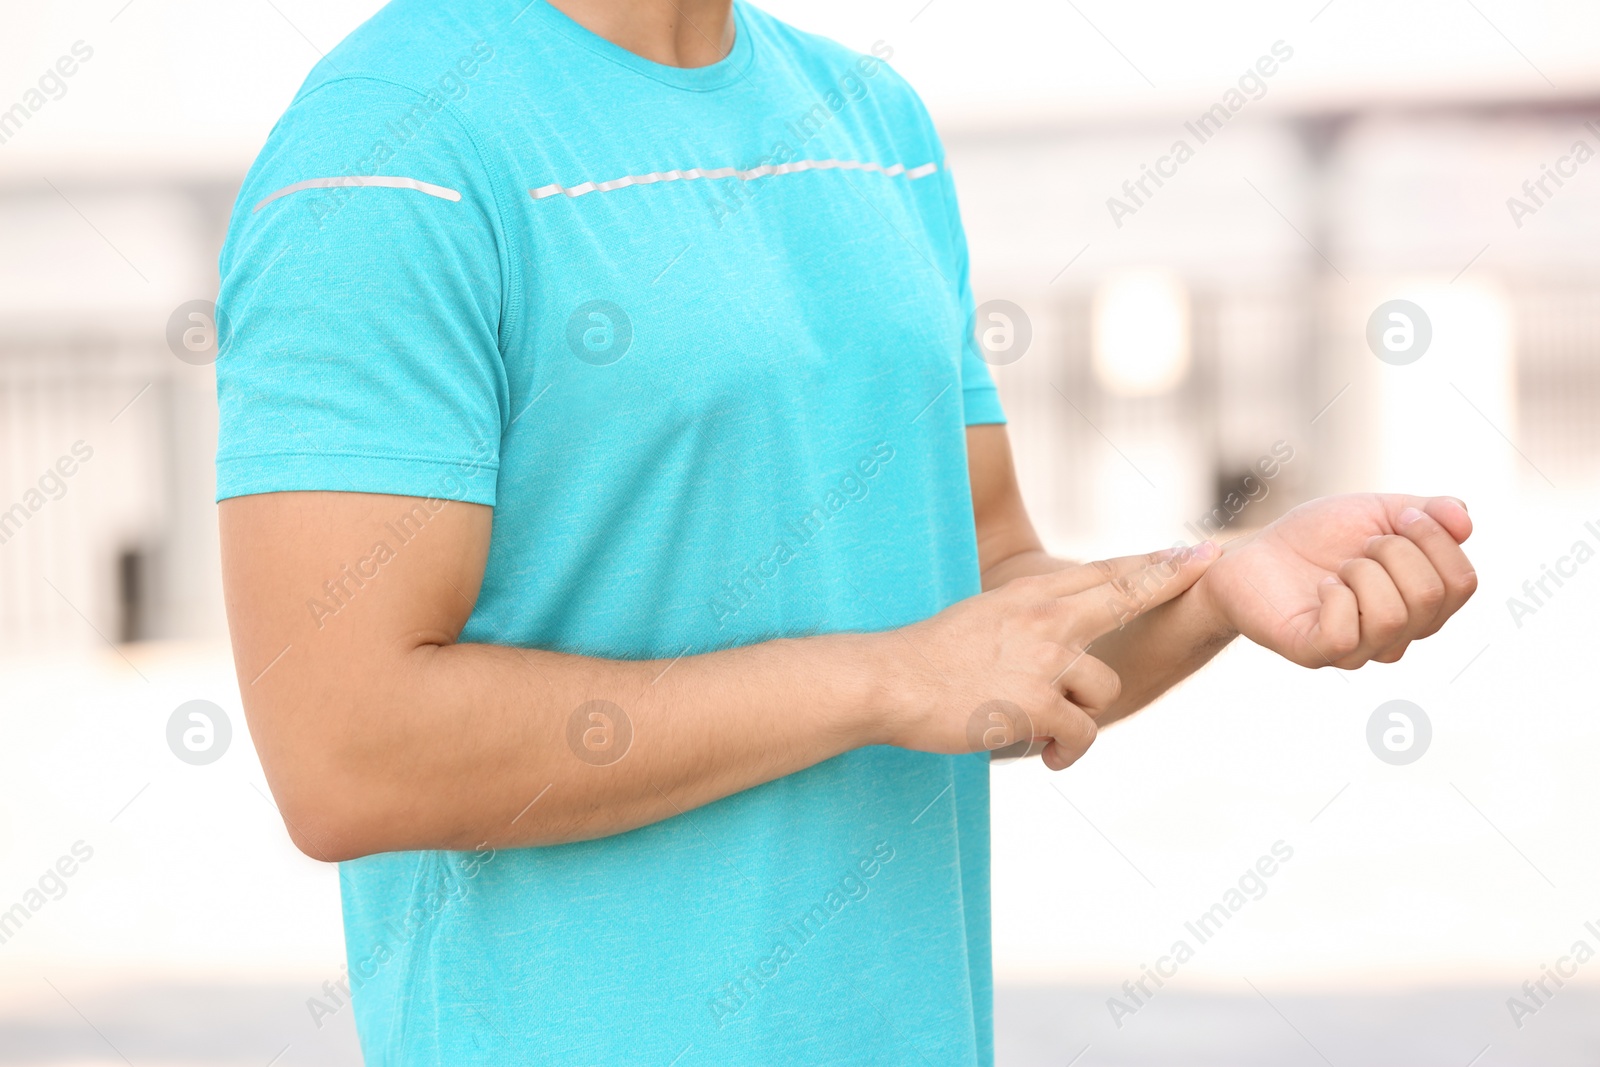 Photo of Young man checking pulse outdoors on sunny day